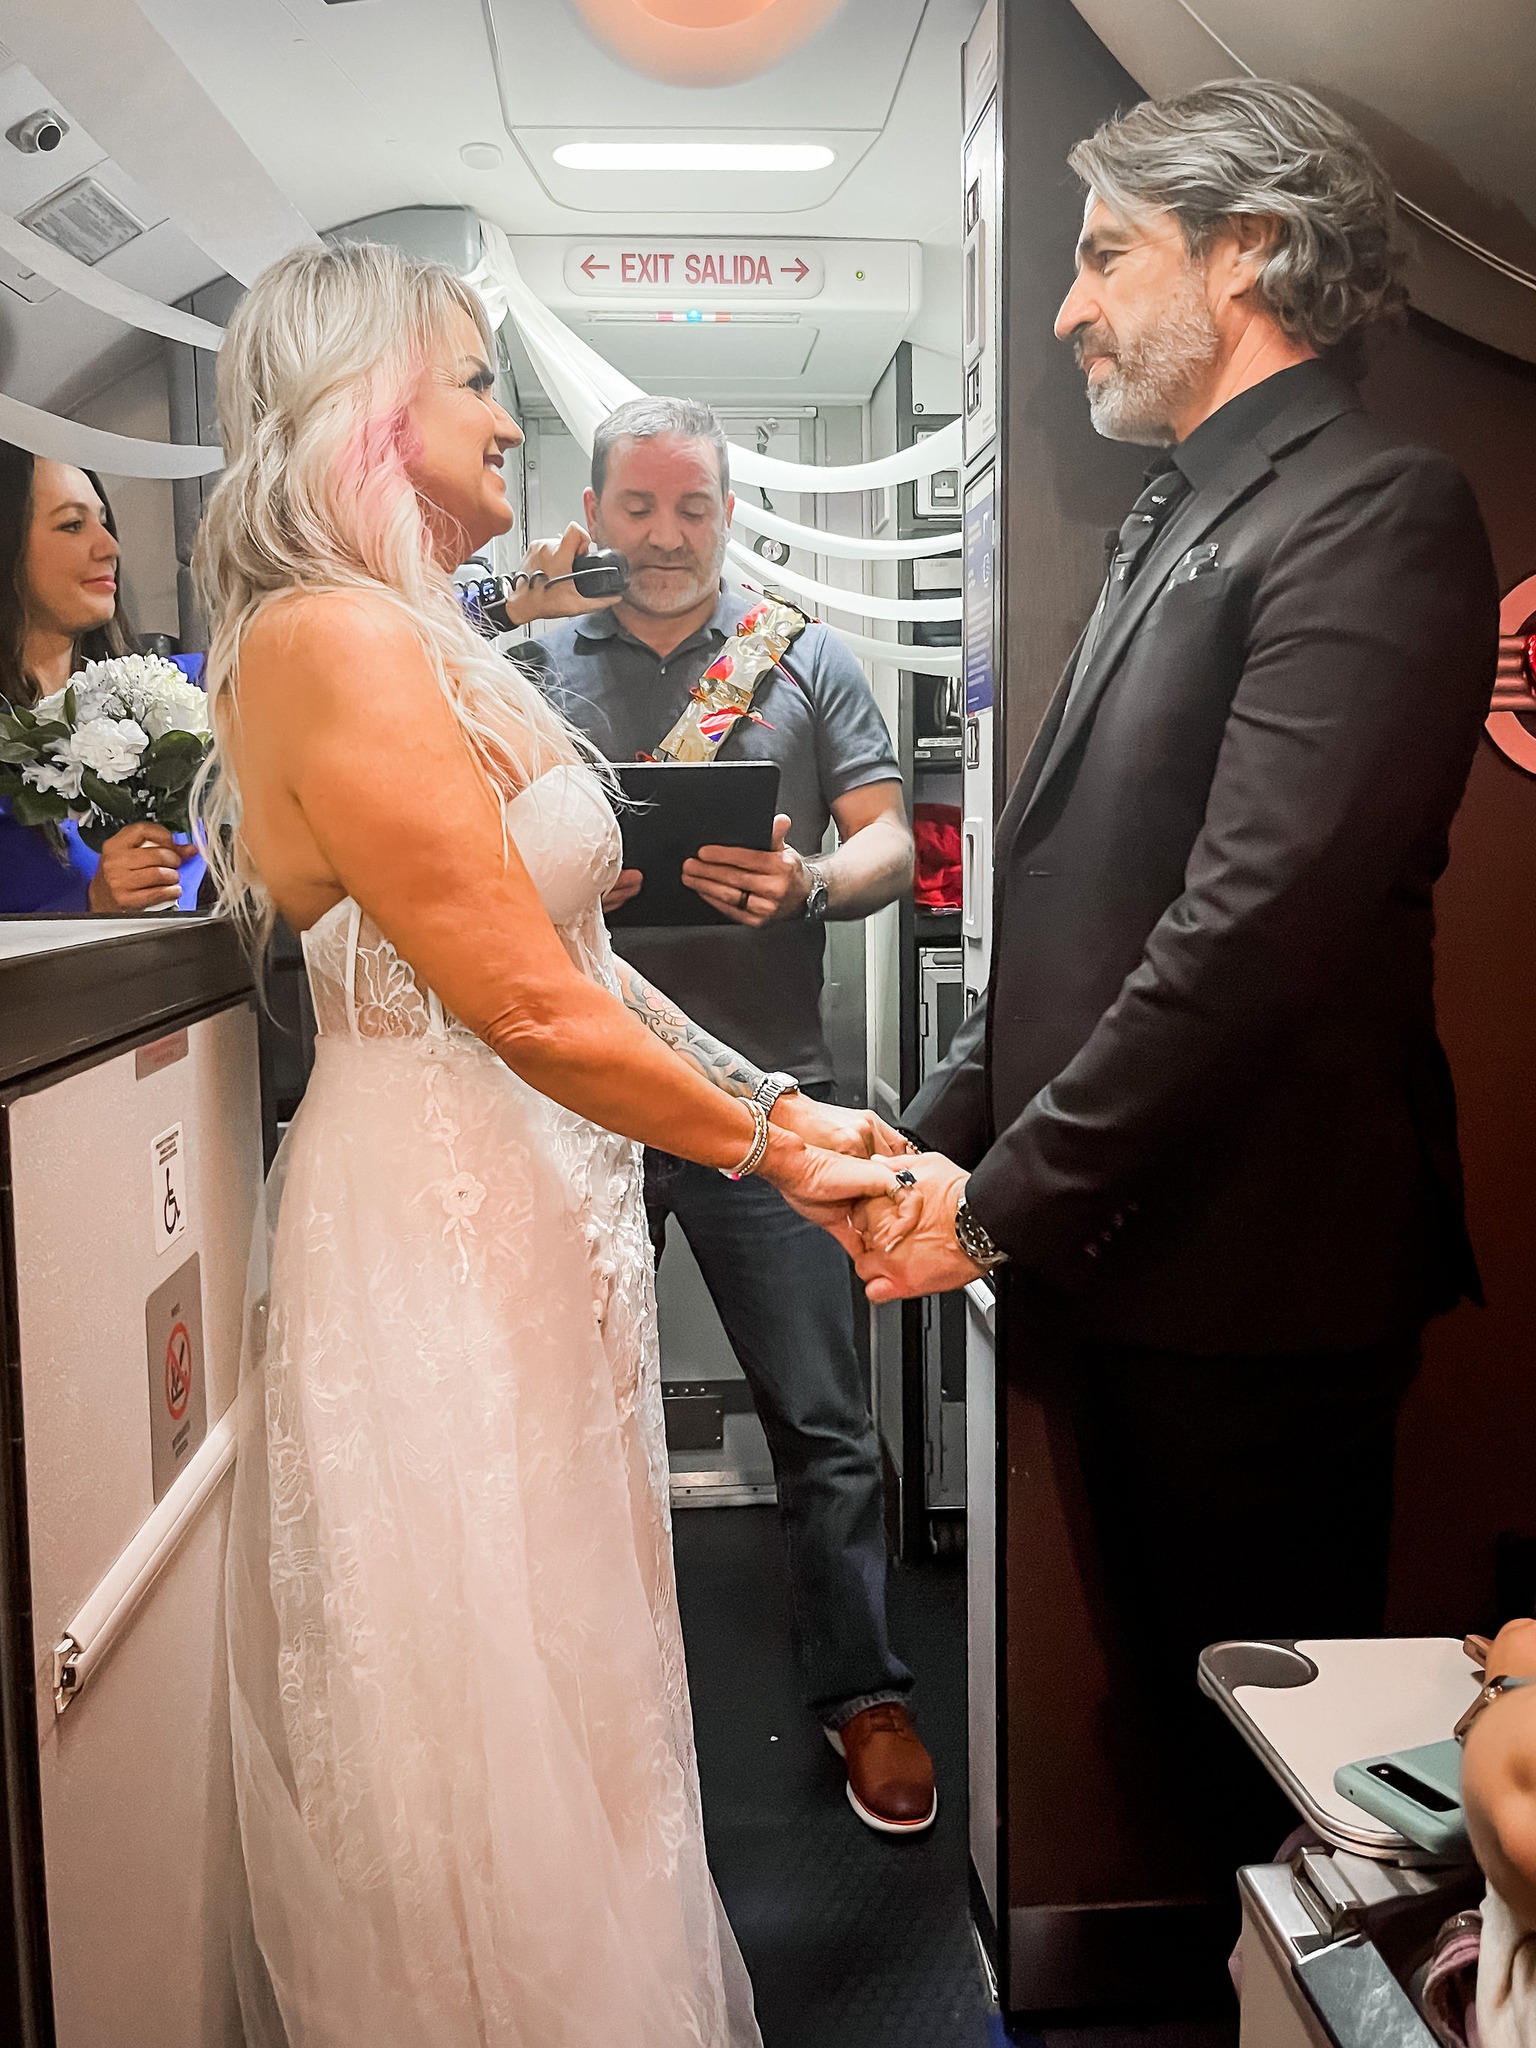 After missing their wedding, the couple got married on the plane in an impromptu ceremony